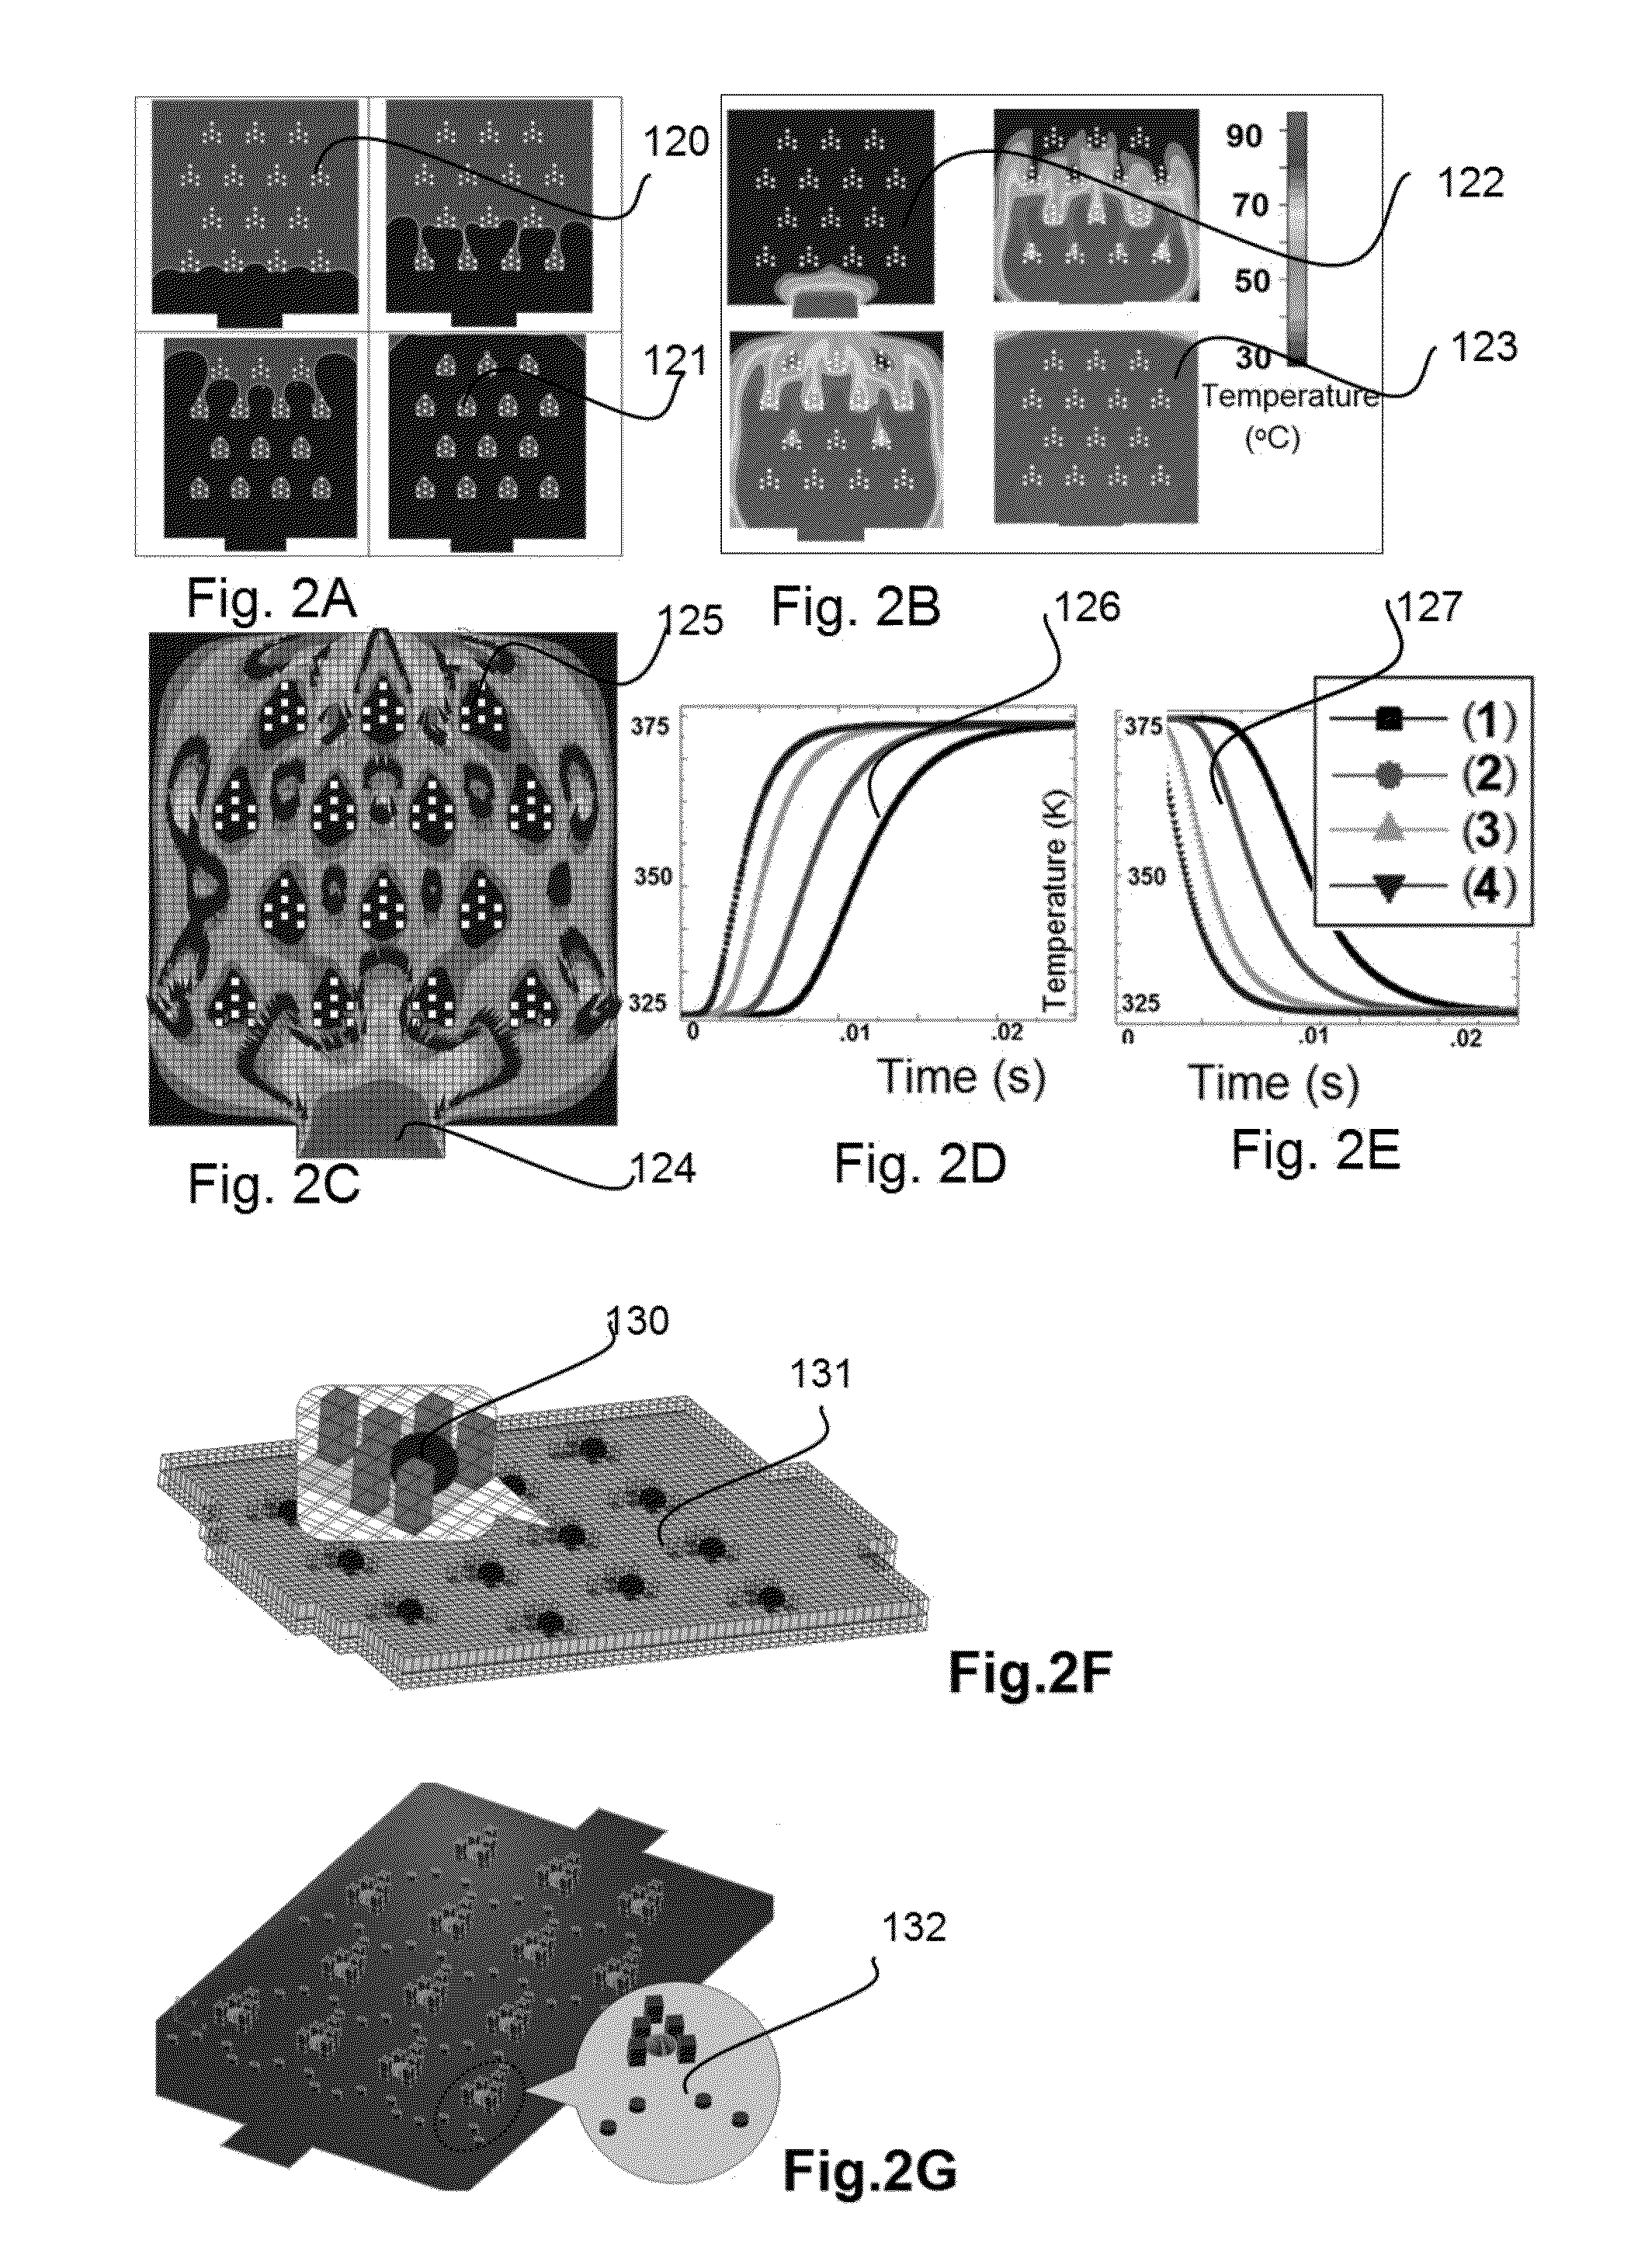 Microfluidic devices and methods based on massively parallel picoreactors for cell and molecular diagnostics